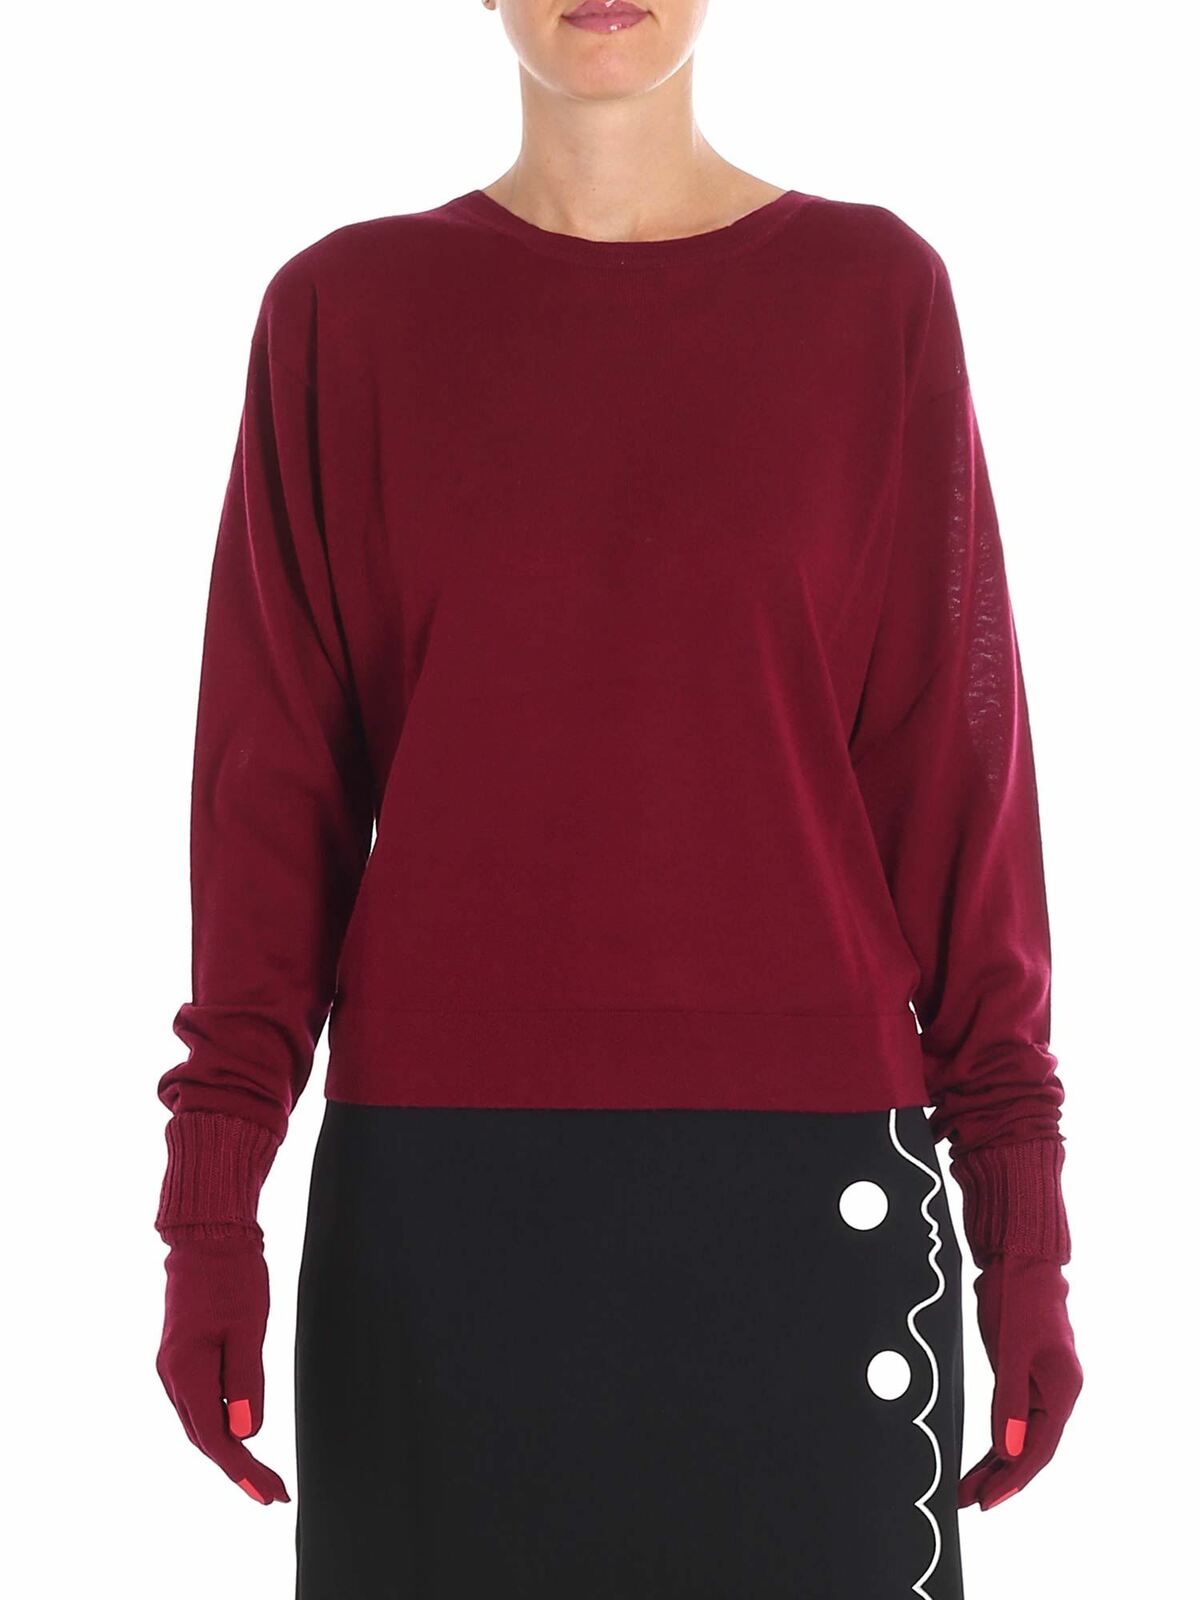 Vivetta Yamada Burgundy Sweater With Gloves Included In Red